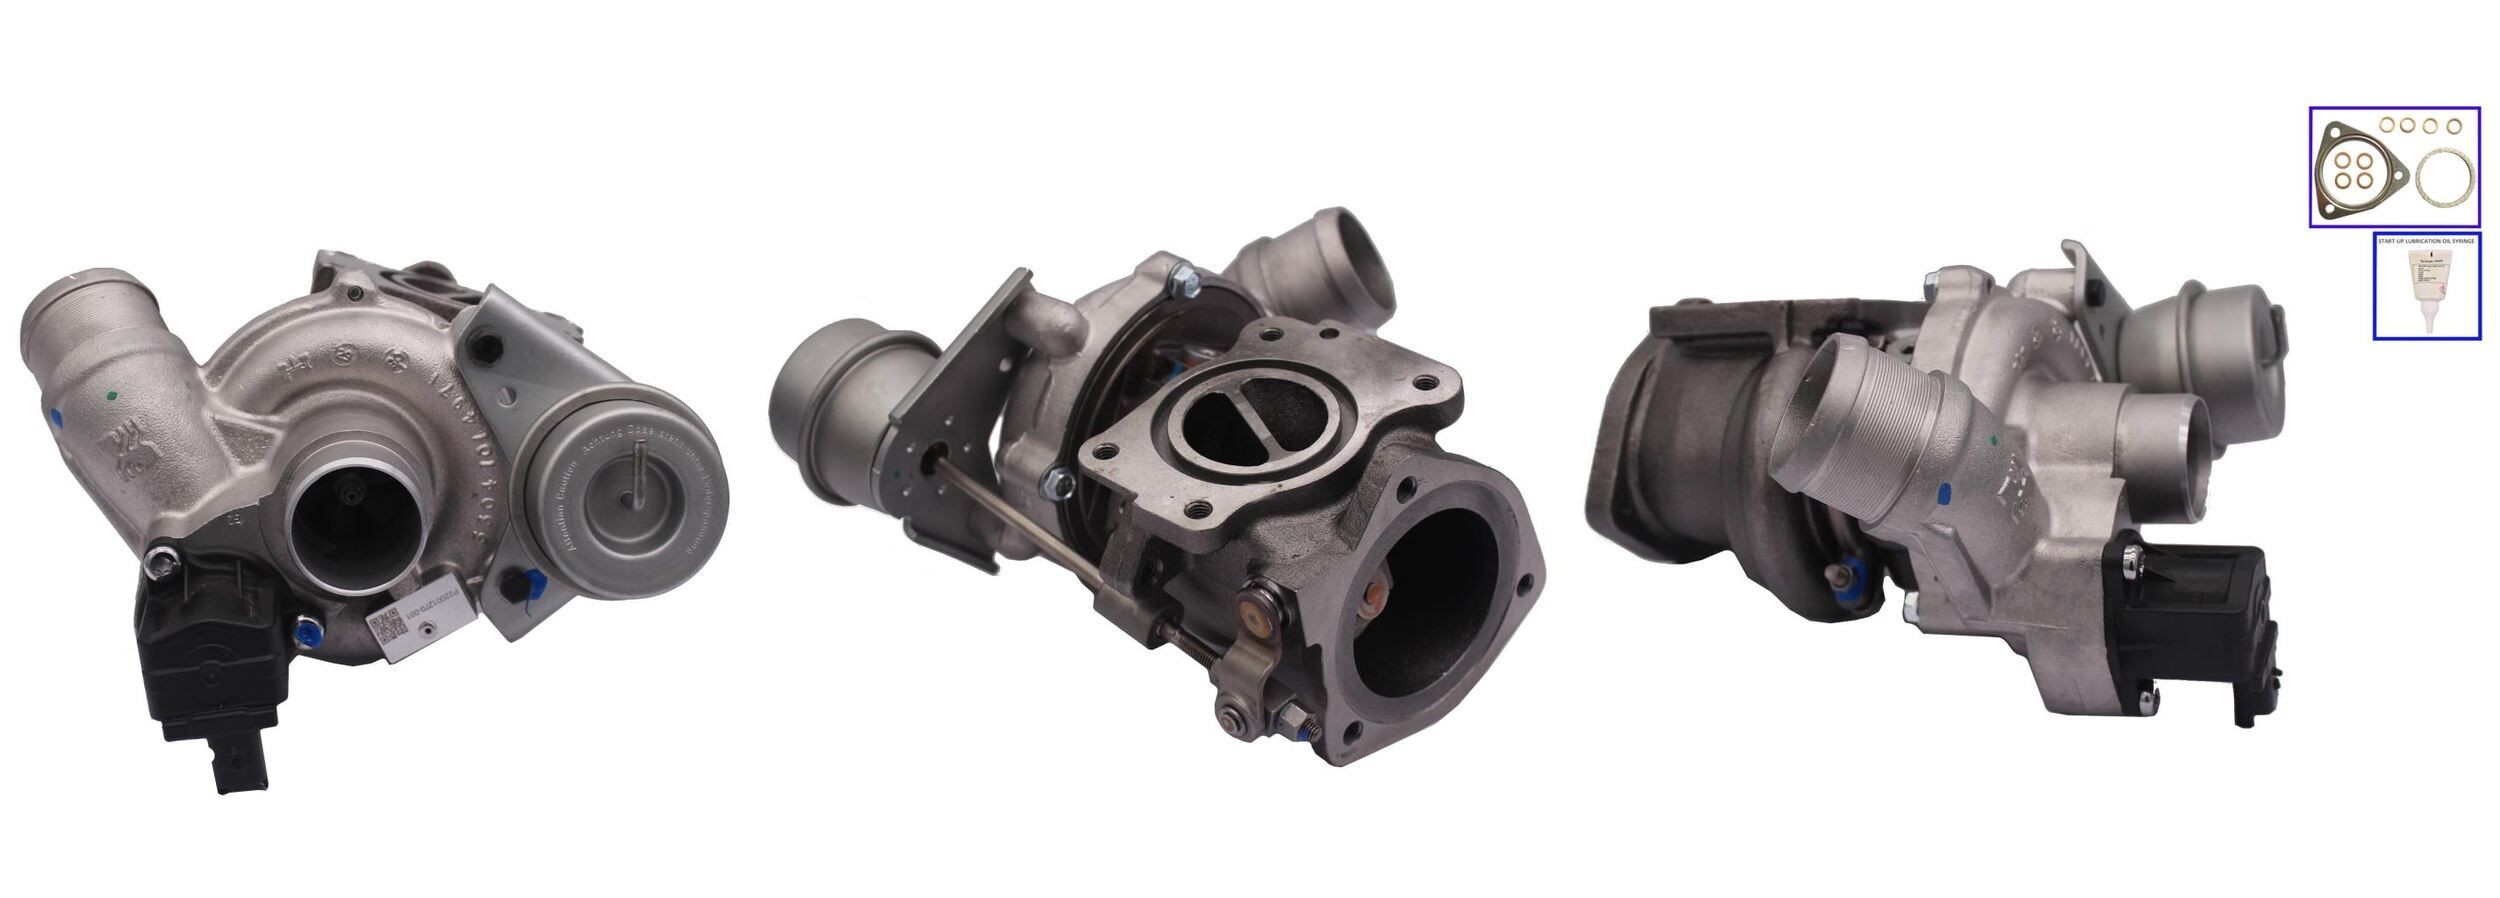 Turbocharger LUCAS Exhaust Turbocharger, Pneumatically controlled actuator, with gaskets/seals - LTRPA53039880117